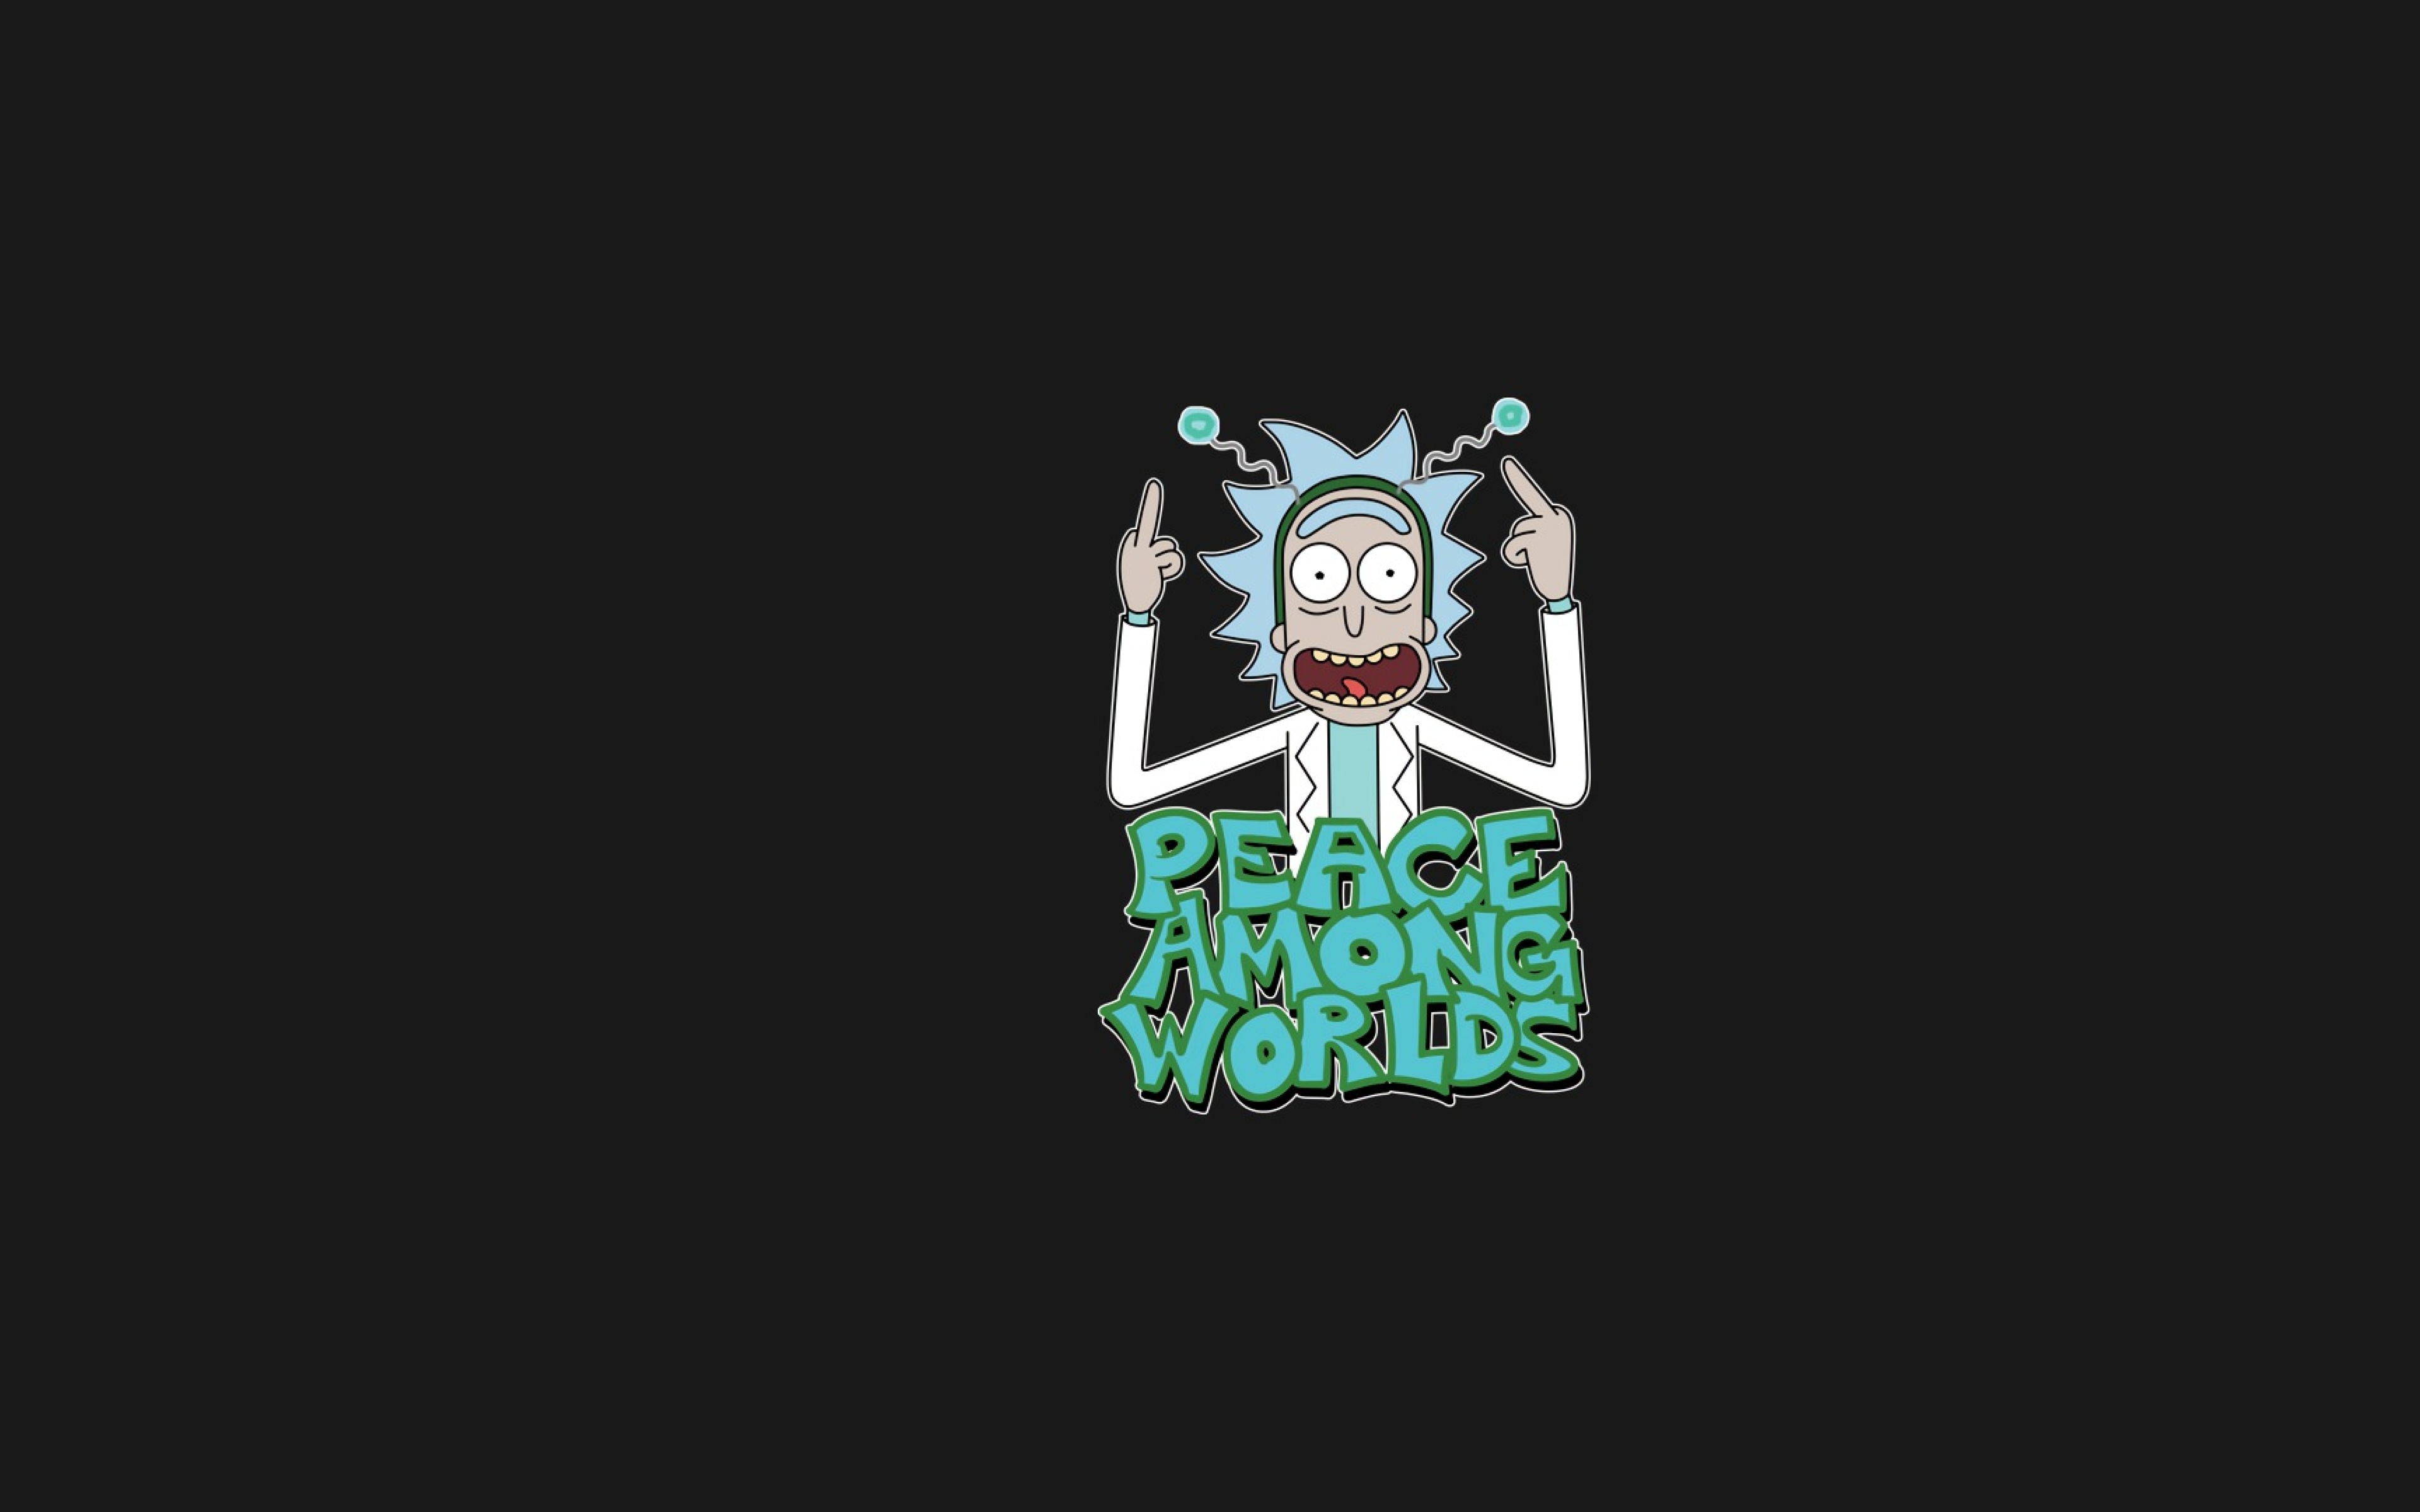 rick wallpaper,turquoise,font,turquoise,fashion accessory,fictional character